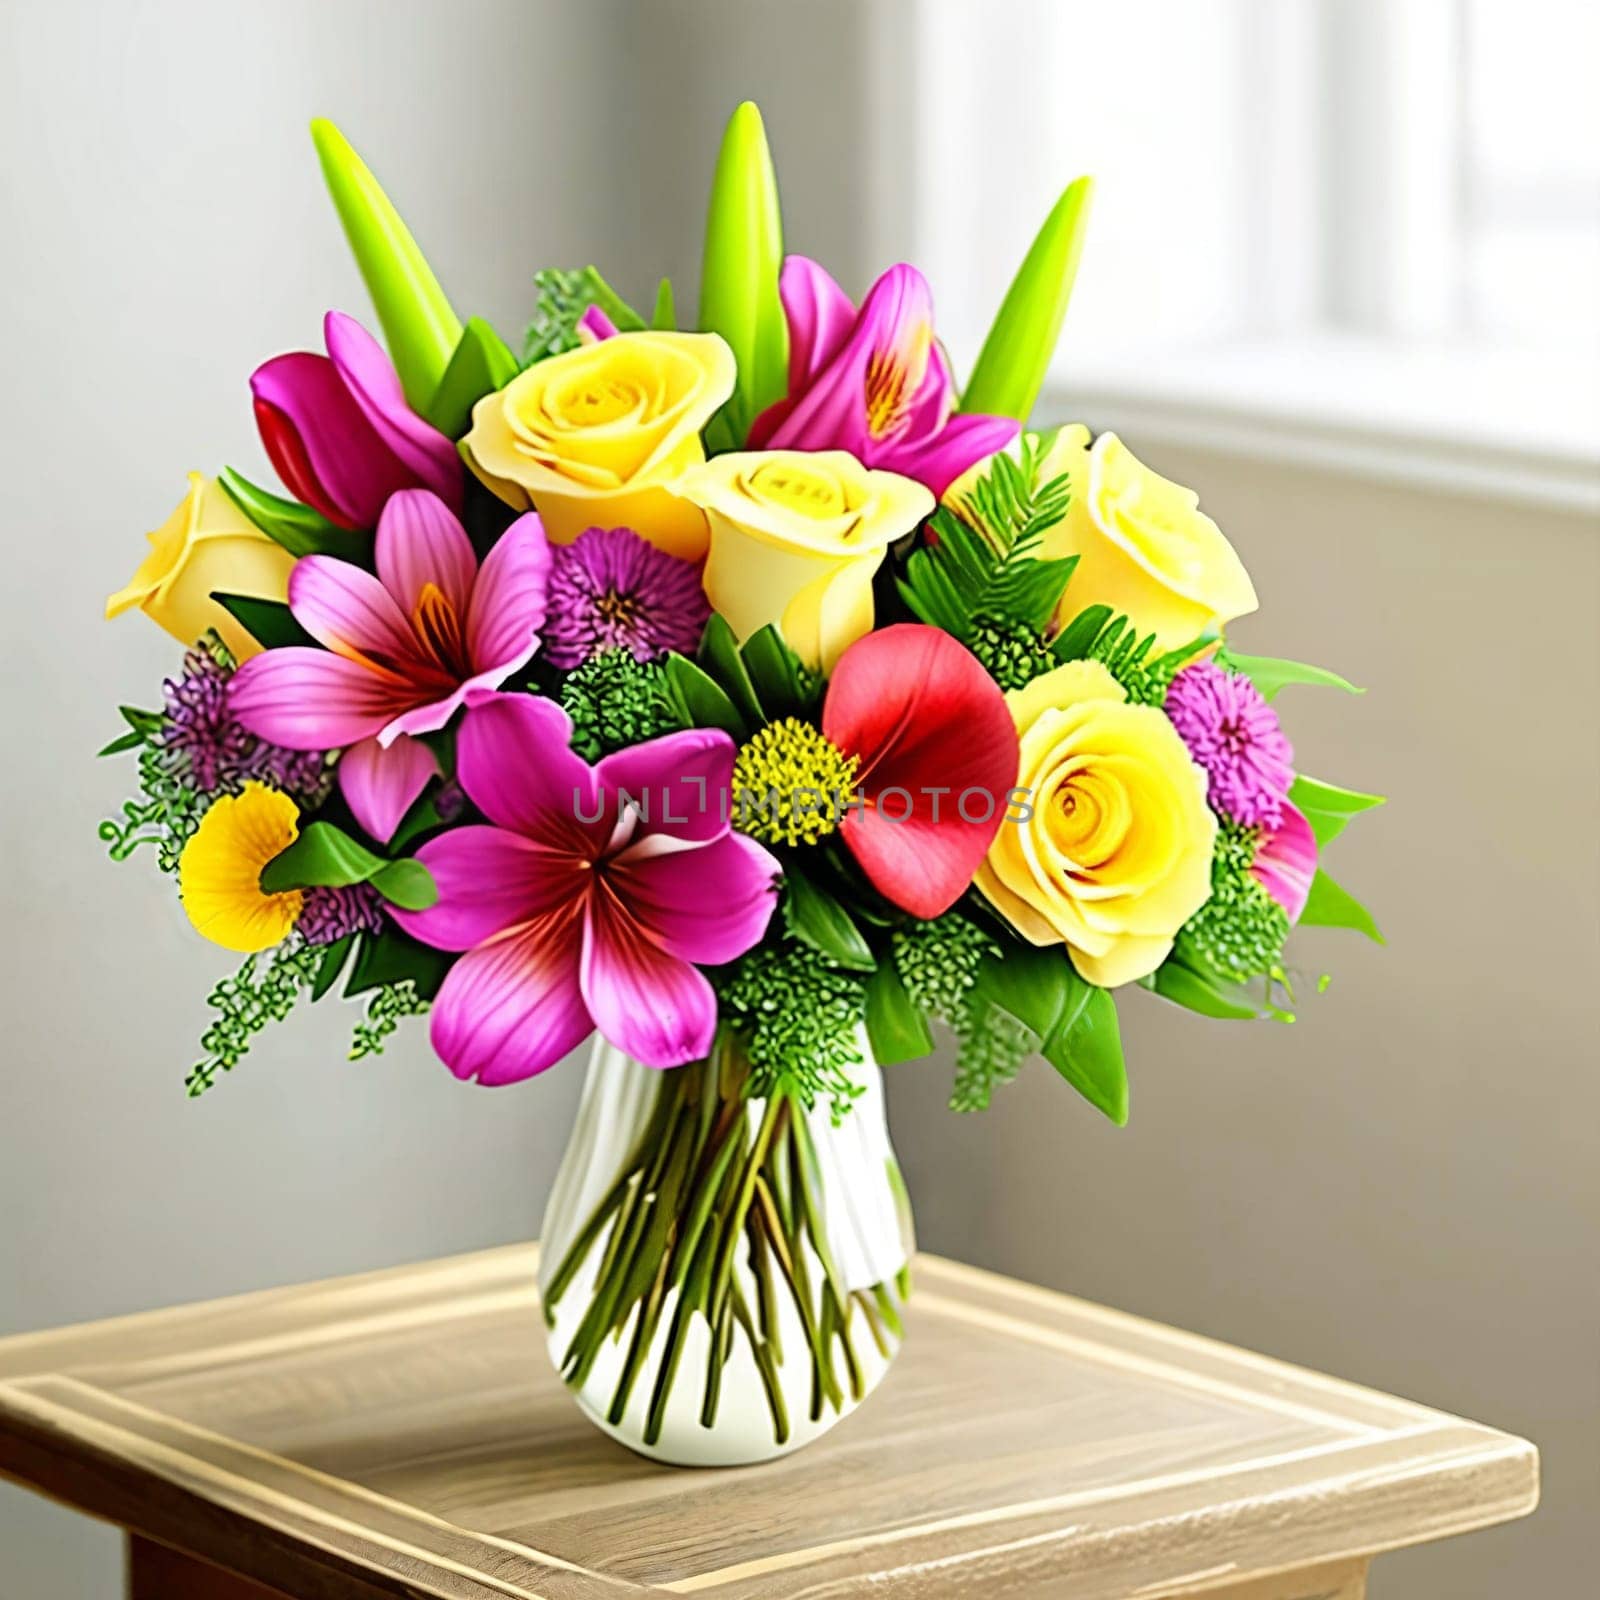 Floral Elegance. A vibrant bouquet of spring flowers arranged in a stylish vase by GoodOlga